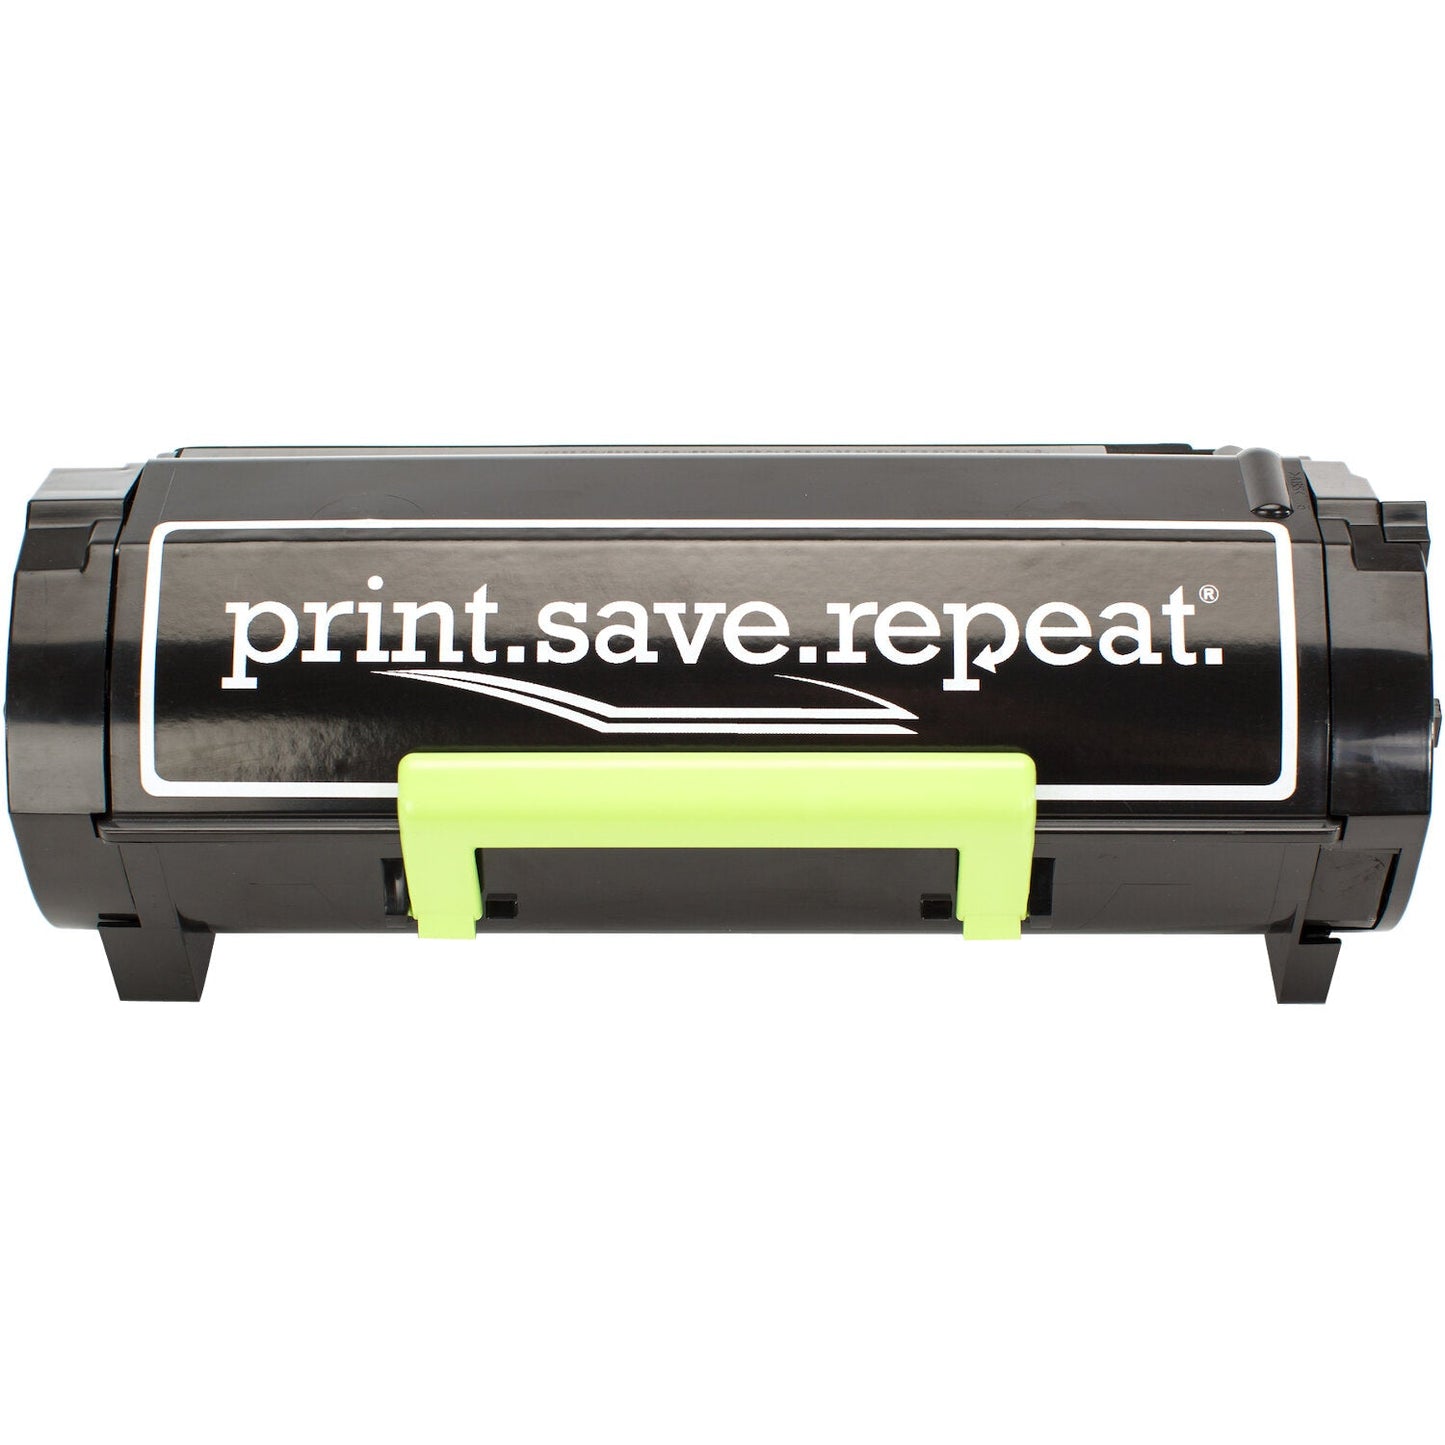 Print.Save.Repeat. Lexmark 56F0X0G Extra High Yield Remanufactured Toner Cartridge for MS421, MS521, MS621, MS622, MX421, MX521, MX522, MX622 [20,000 Pages]